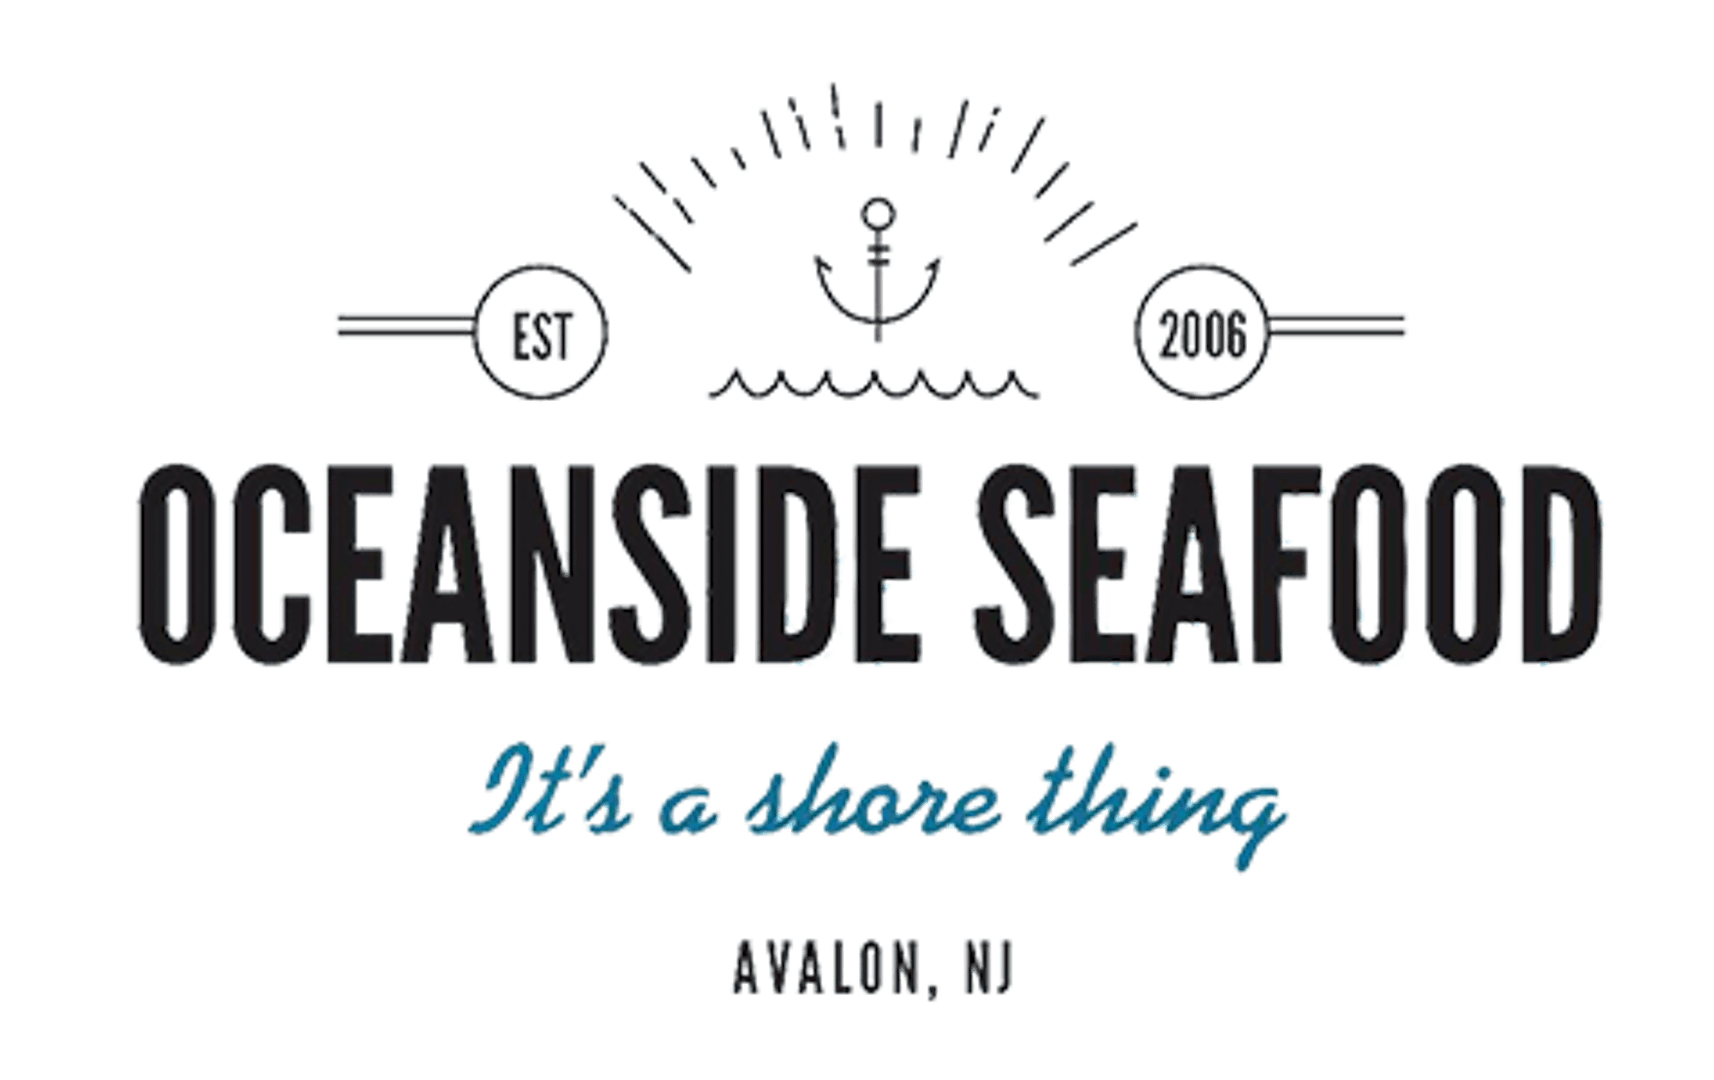 [inactive] Oceanside Seafood